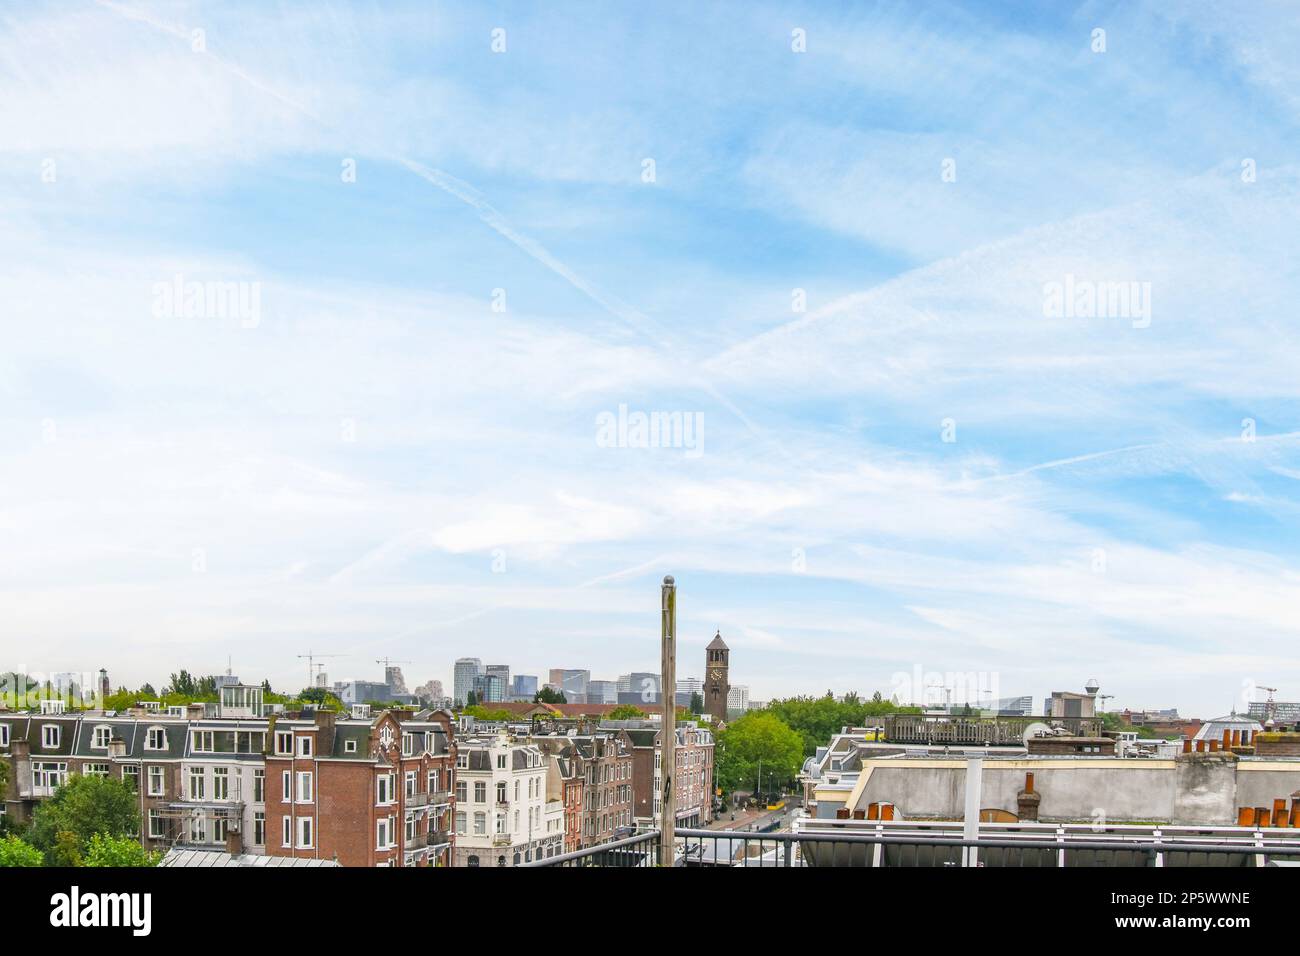 Amsterdam, Netherlands - 10 April, 2021: an urban area with buildings and trees in the fore, taken from a high angle on a clear blue sky day Stock Photo